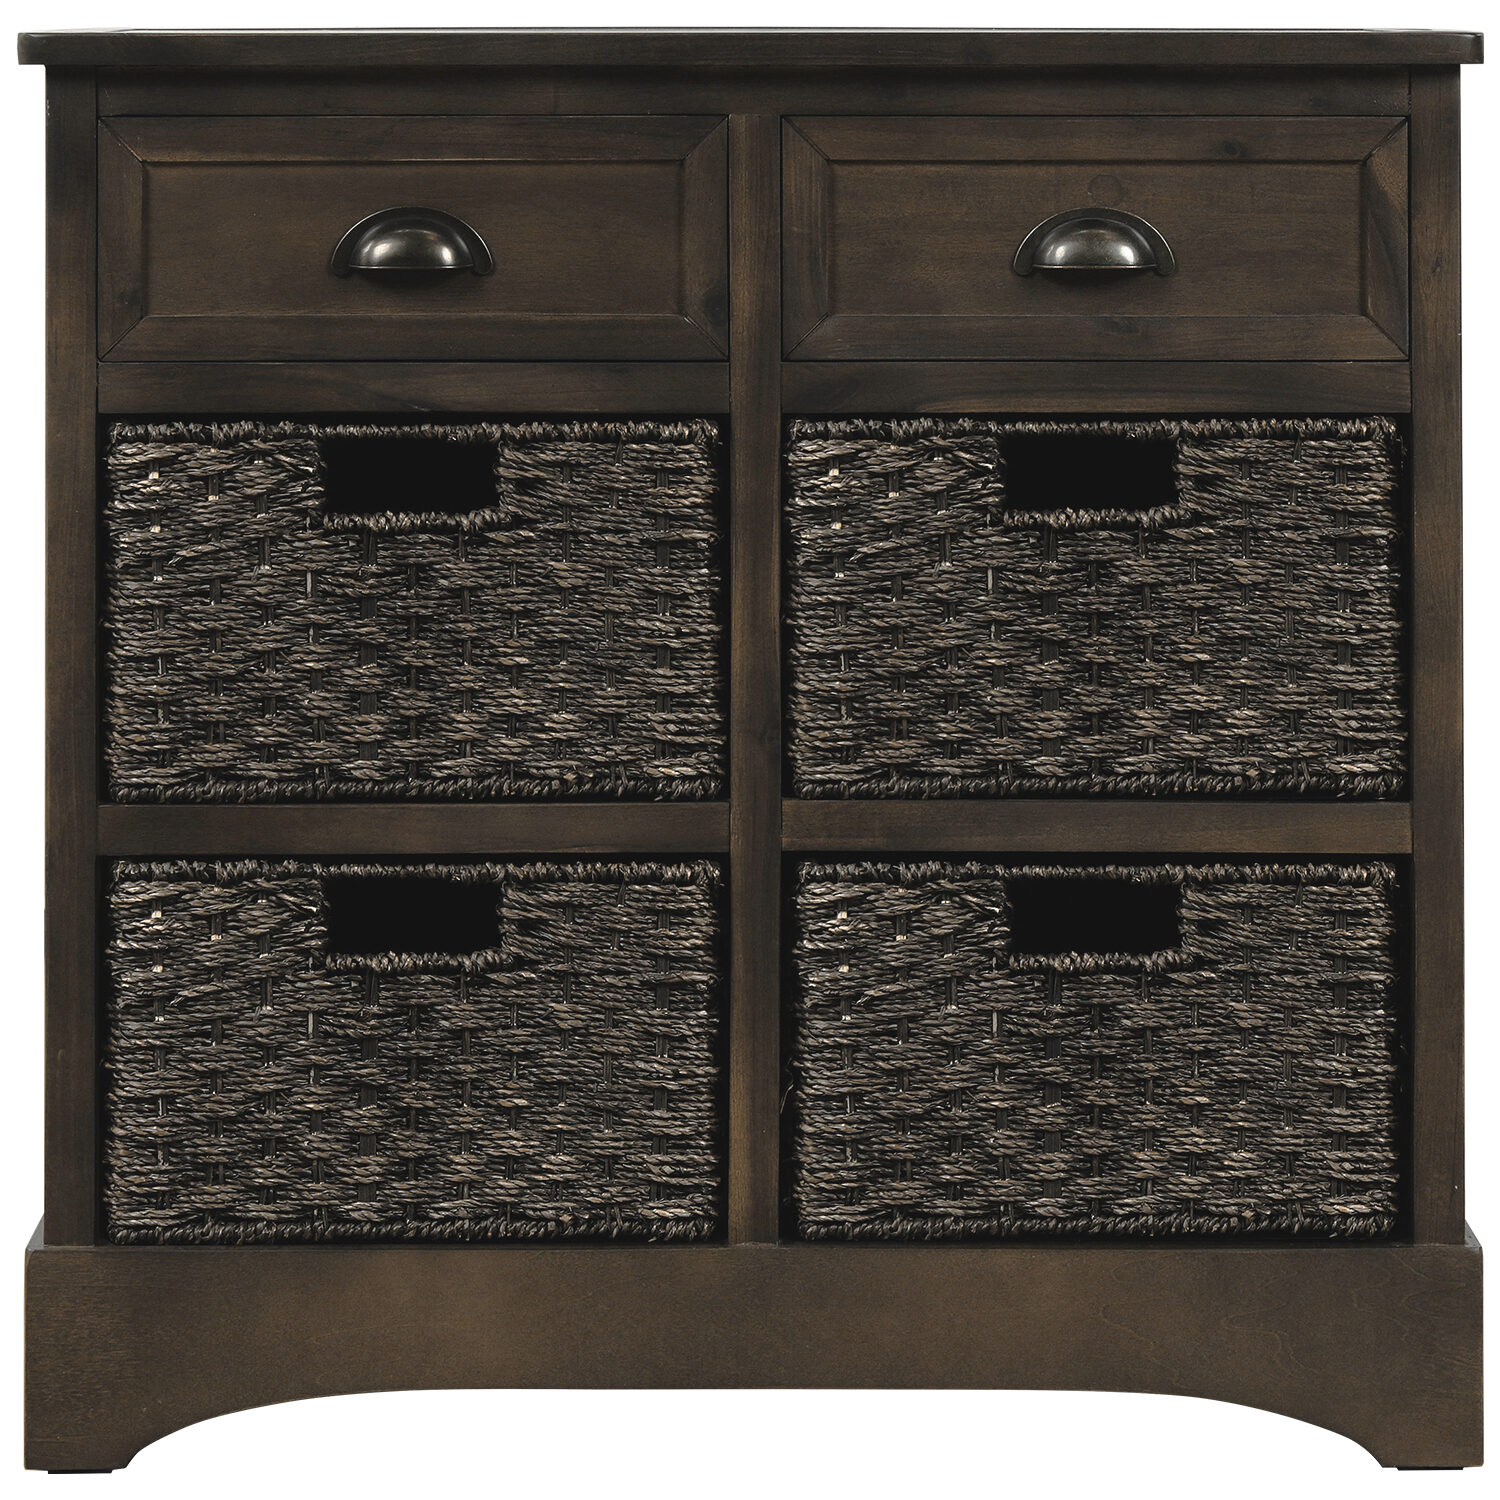 Rustic Storage Cabinet with Two Drawers, Four Classic Rattan Basket Storage Shelves, Bookcases with Rubber Pads at The Bottom - Espresso